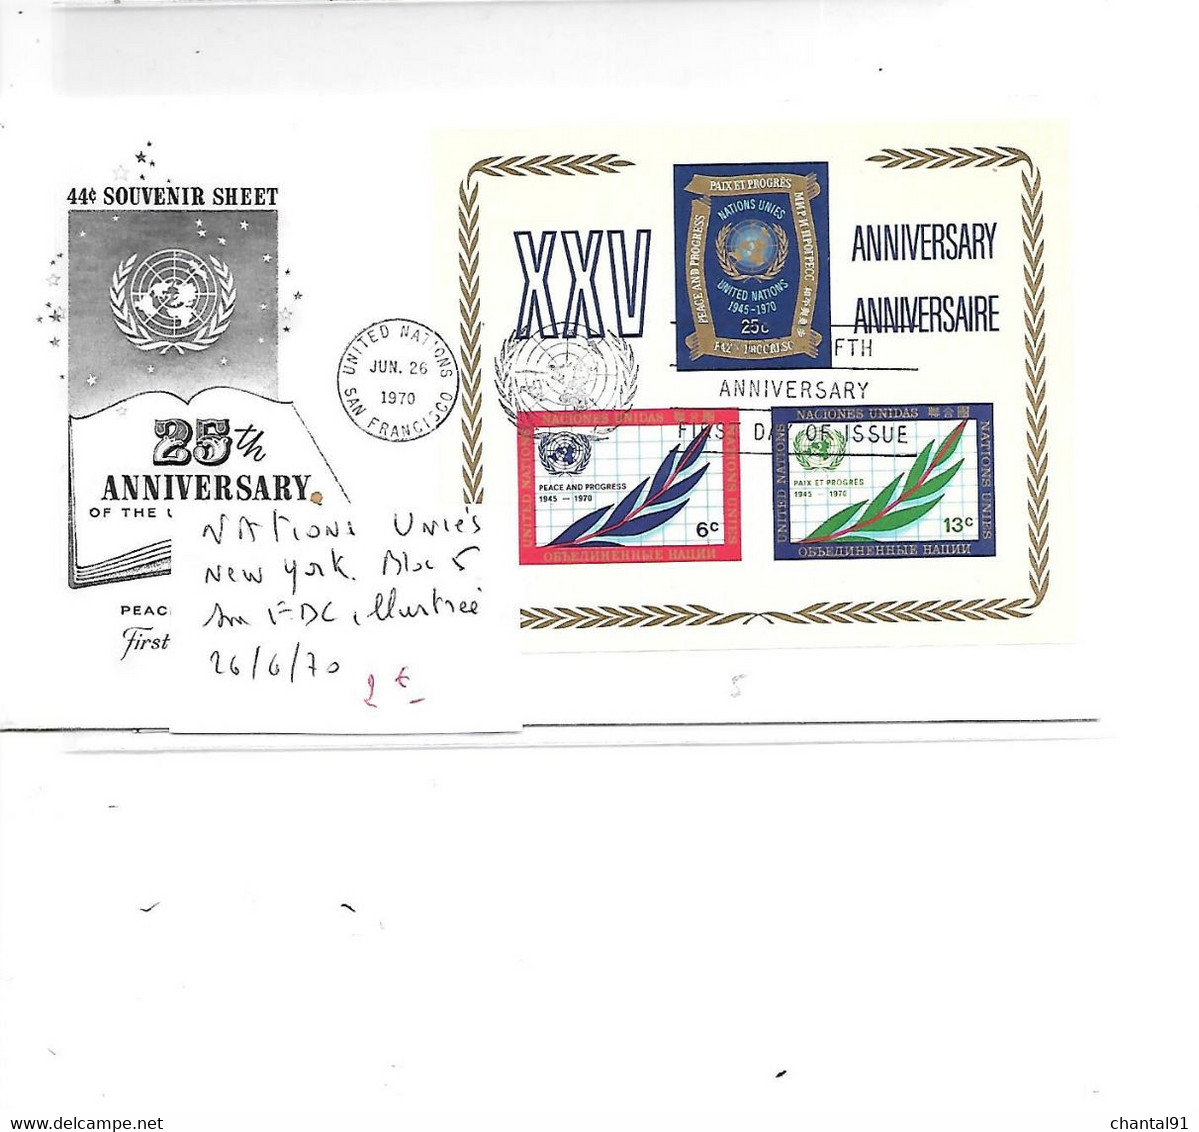 NATIONS UNIES NEW YORK N° BLOC 5 SUR FDC ILLUSTREE 26.6.1970 - Lettres & Documents